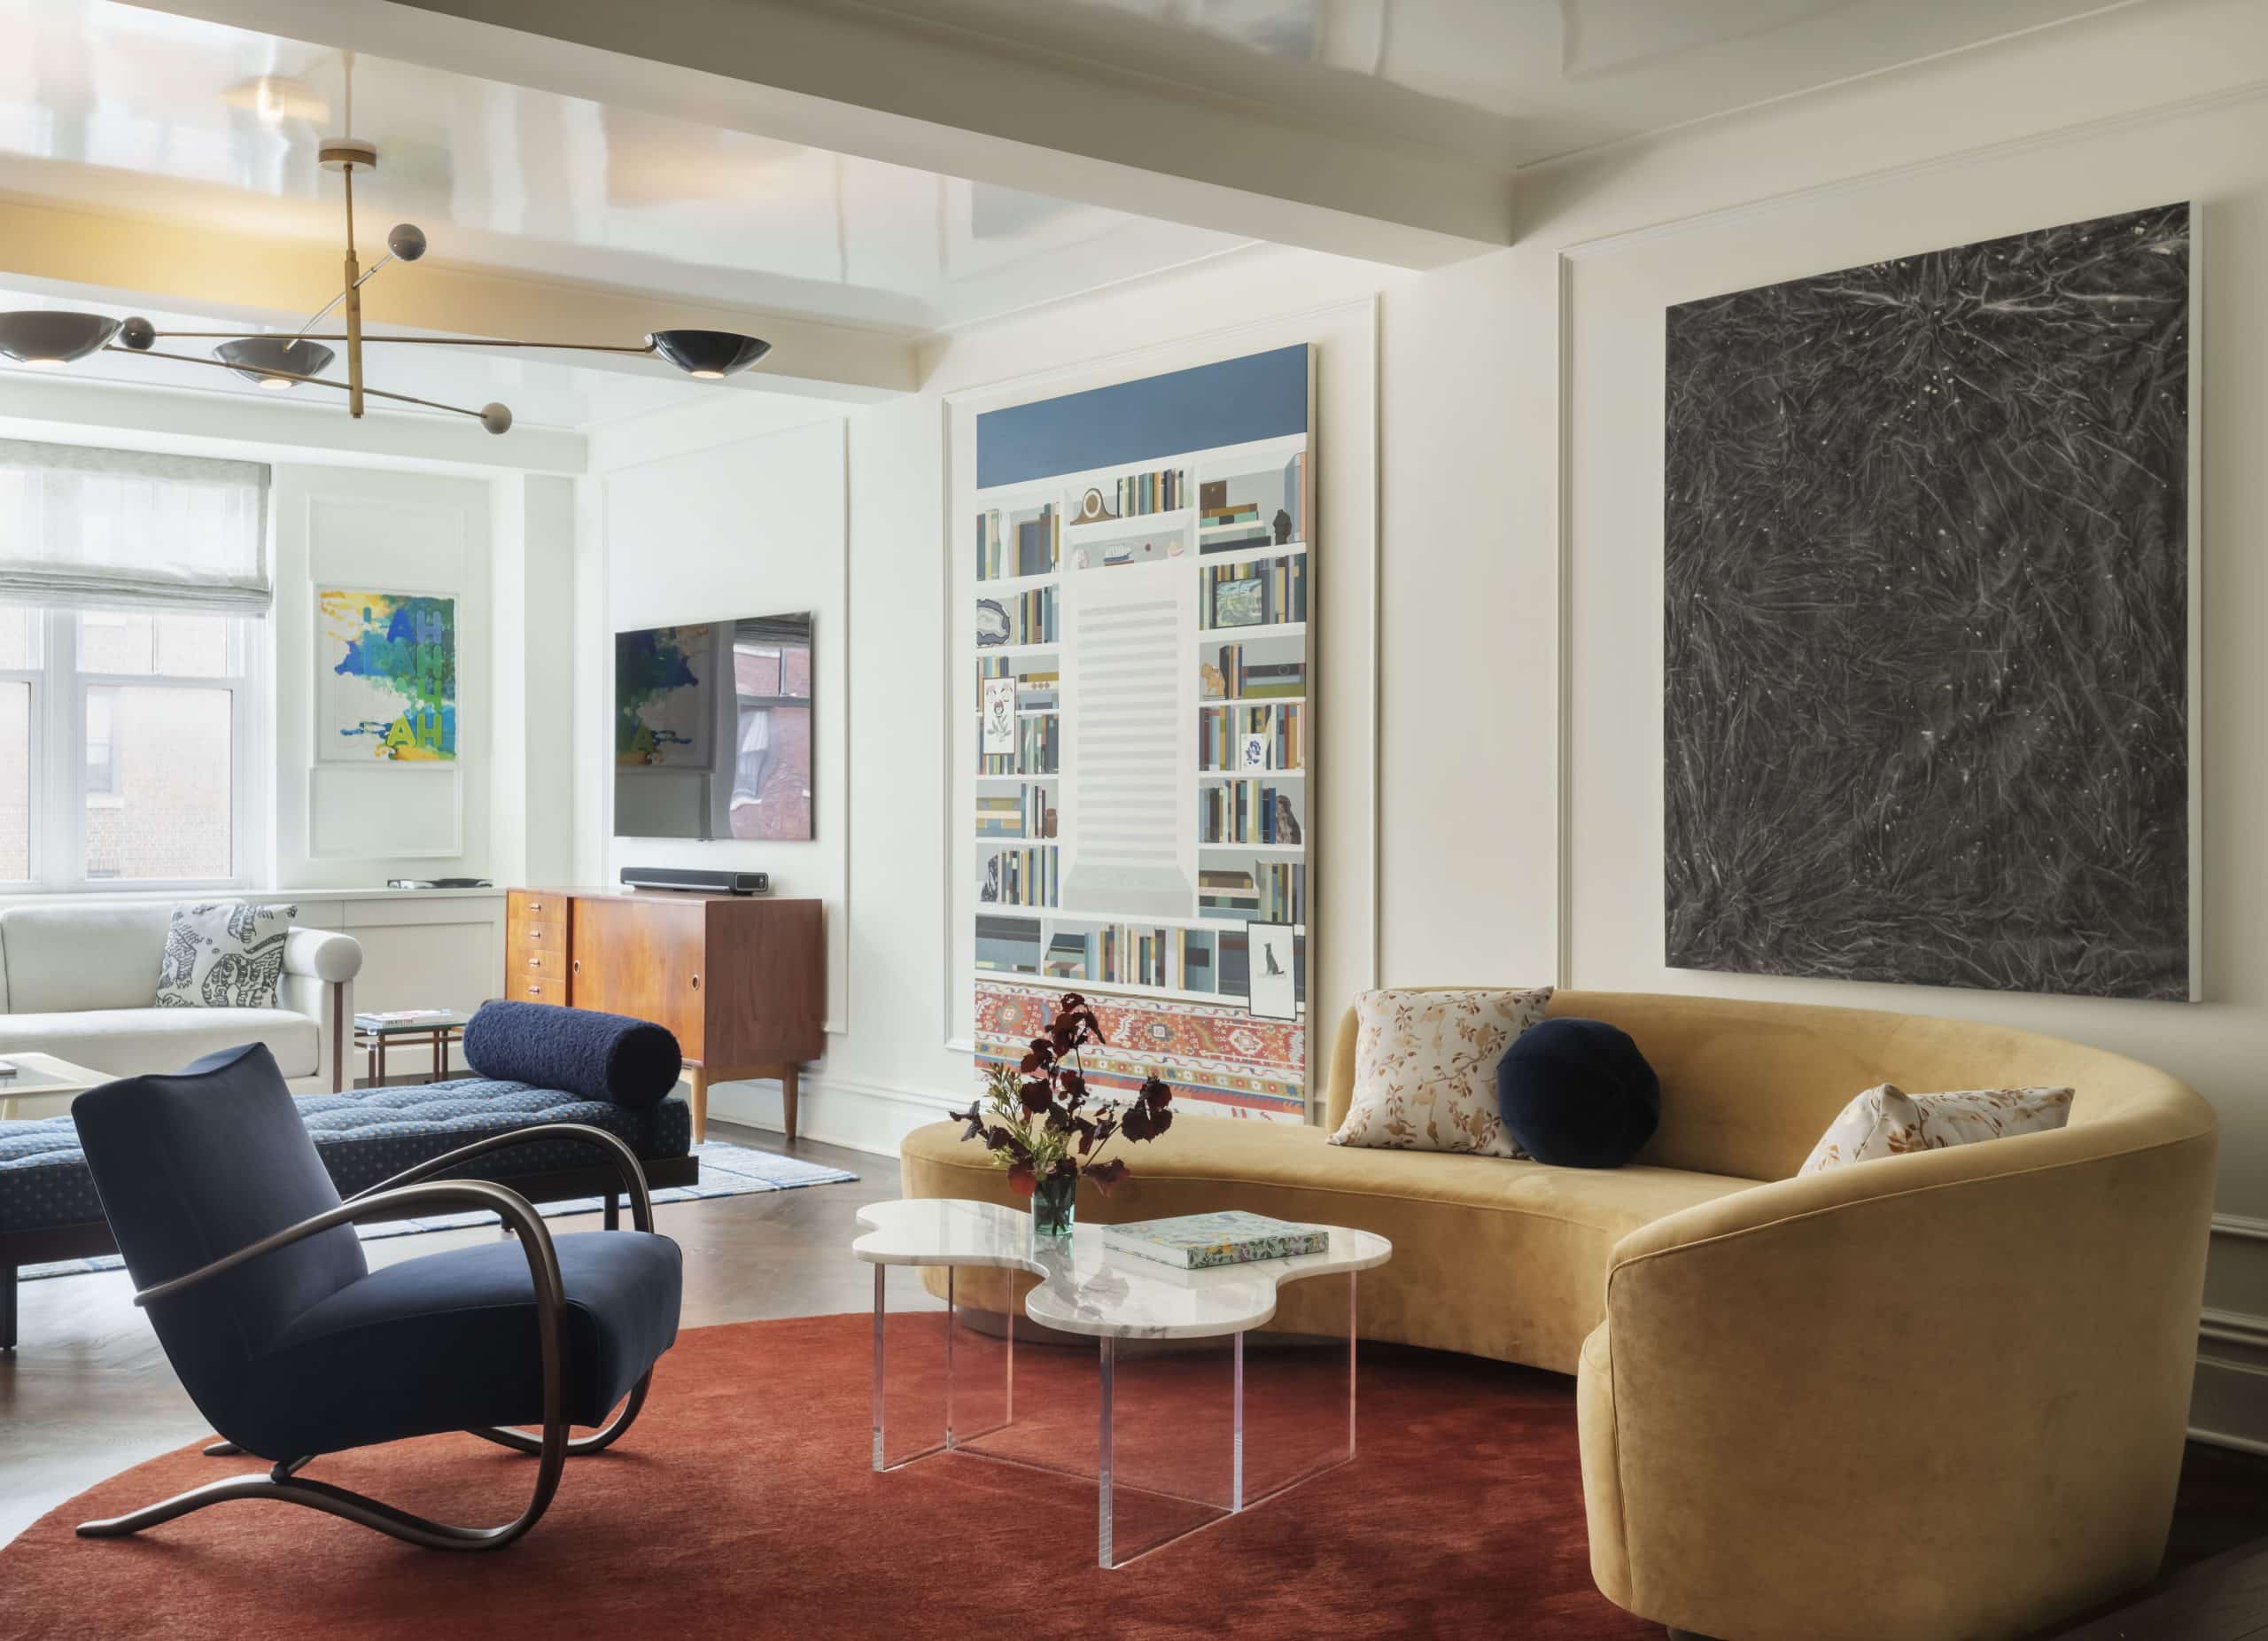 Living room of a Studio DB-designed Upper West Side prewar apartment in New York City with art by Mel Bochner Becky Suss Sam Moyer and a Vladimir Kagan style couch sofa
